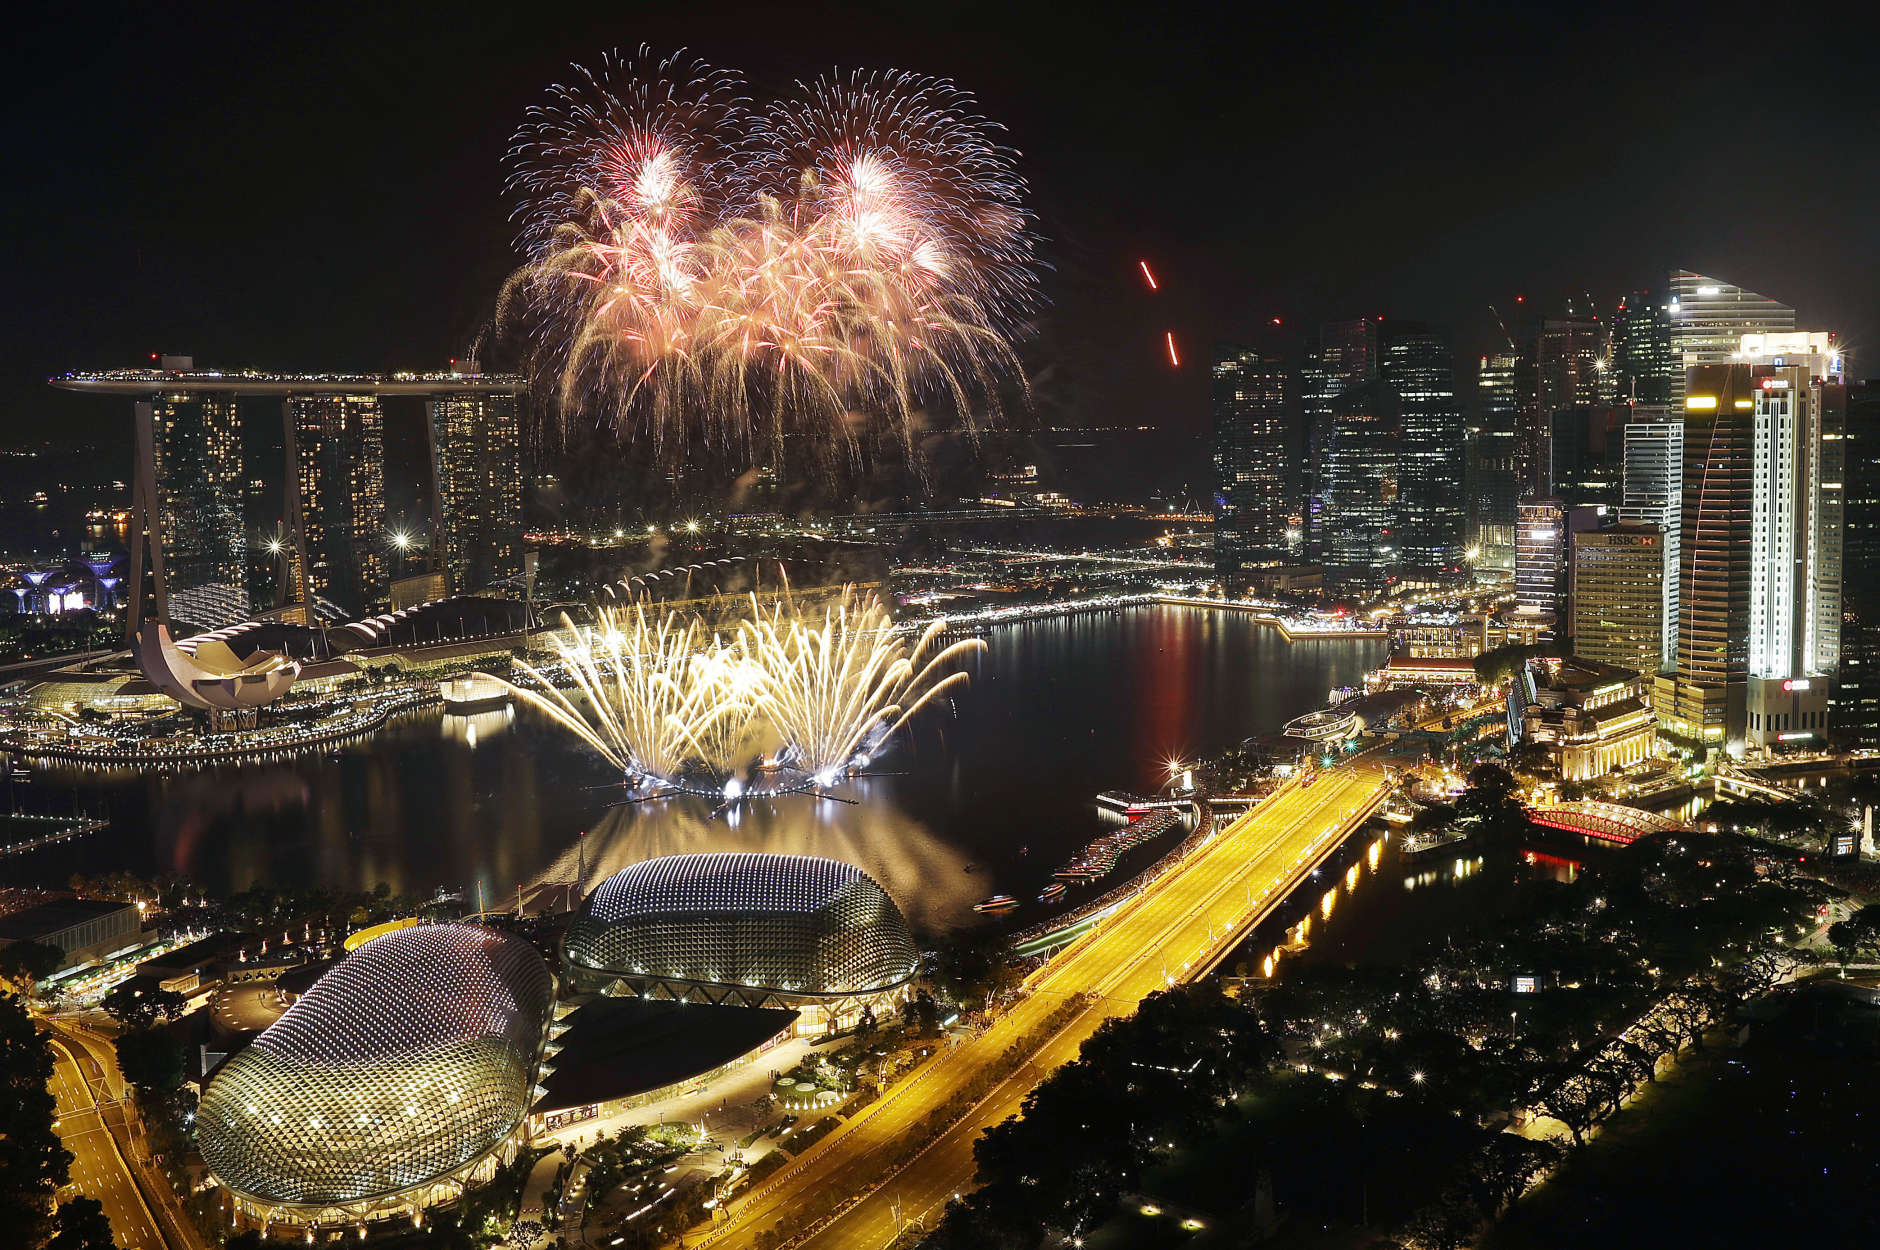 Fireworks explode above Singapore's financial district at the stroke of midnight to mark the New Year's celebrations on Sunday, Jan. 1, 2017, in Singapore. (AP Photo/Wong Maye-E)